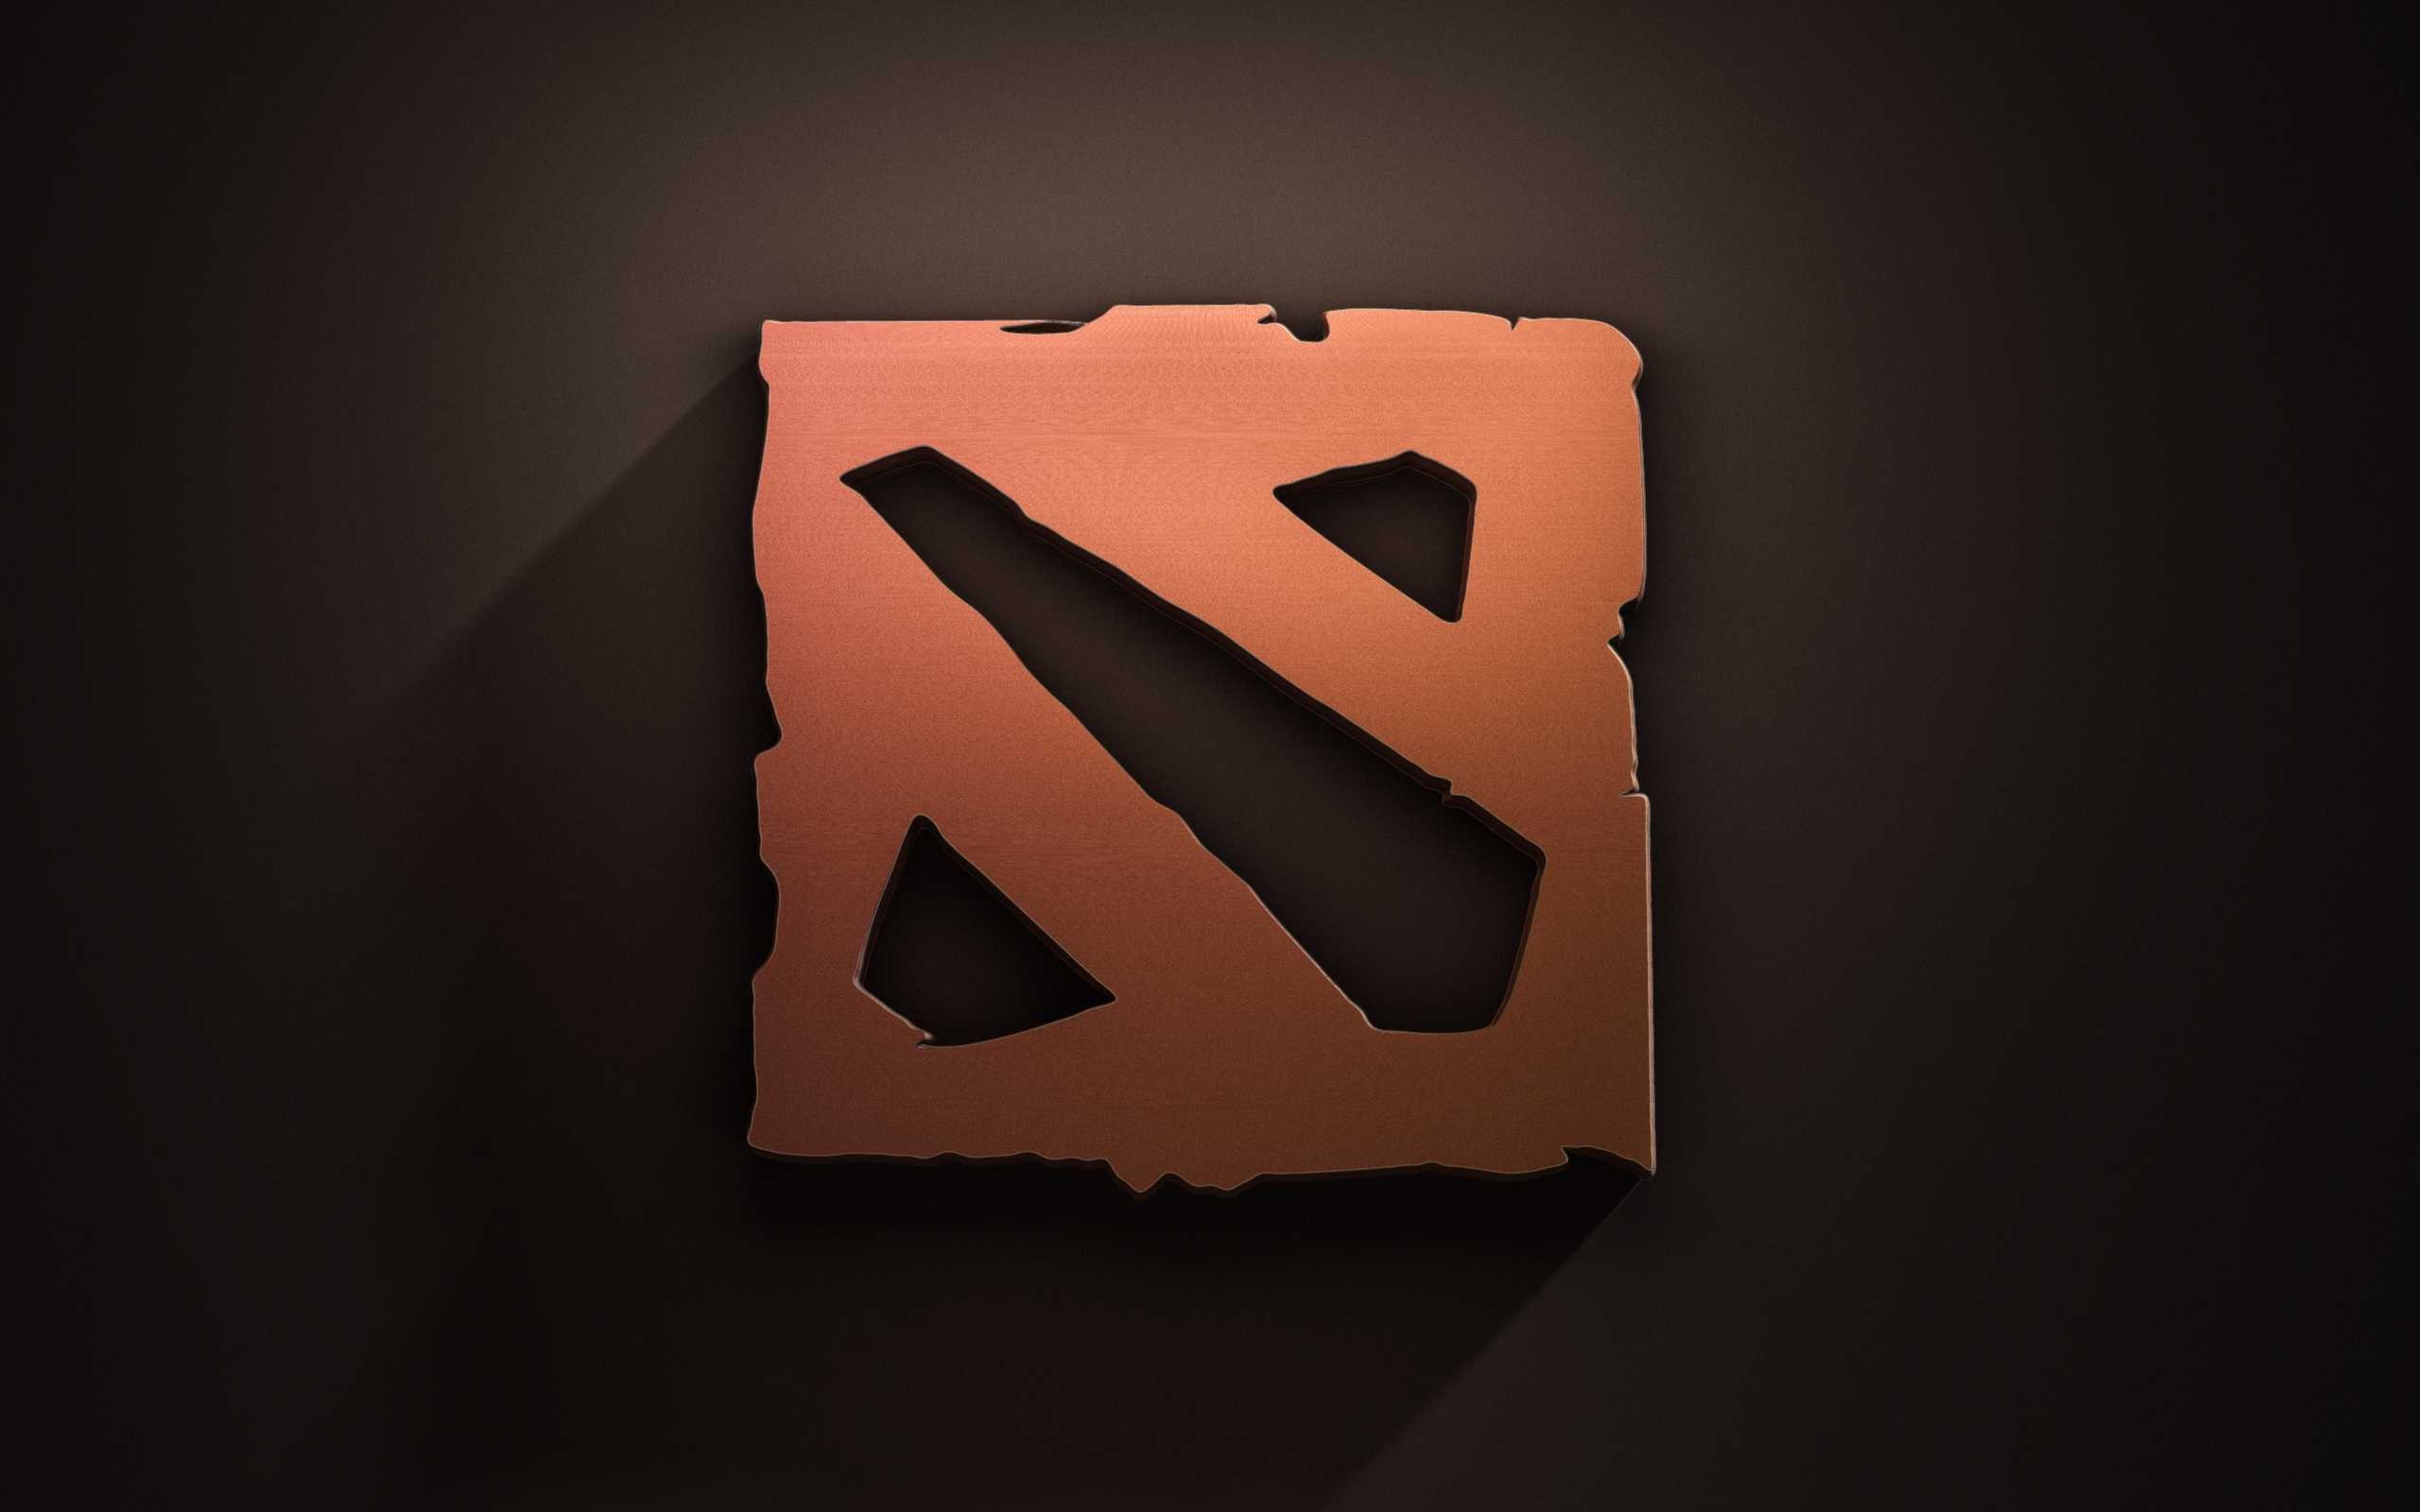 General 2560x1600 Dota 2 Dota Valve Corporation video games PC gaming brown background simple background